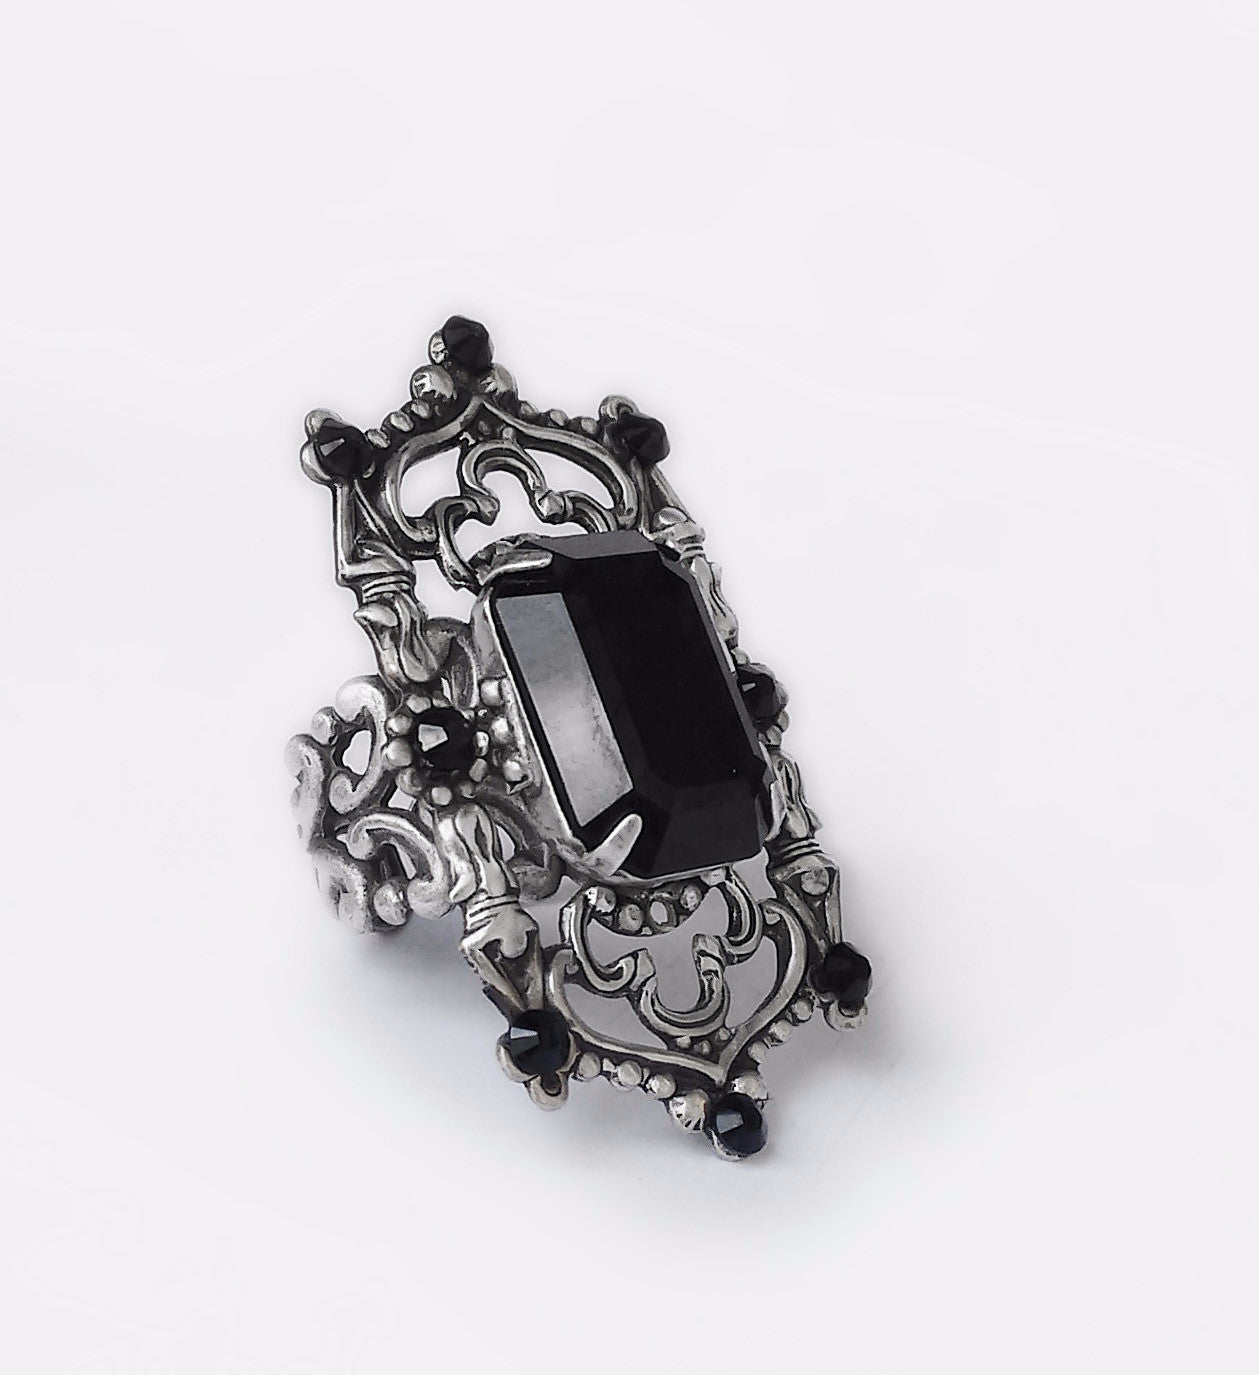 Gothic Cathedral Ring - Aranwen's Jewelry
 - 1